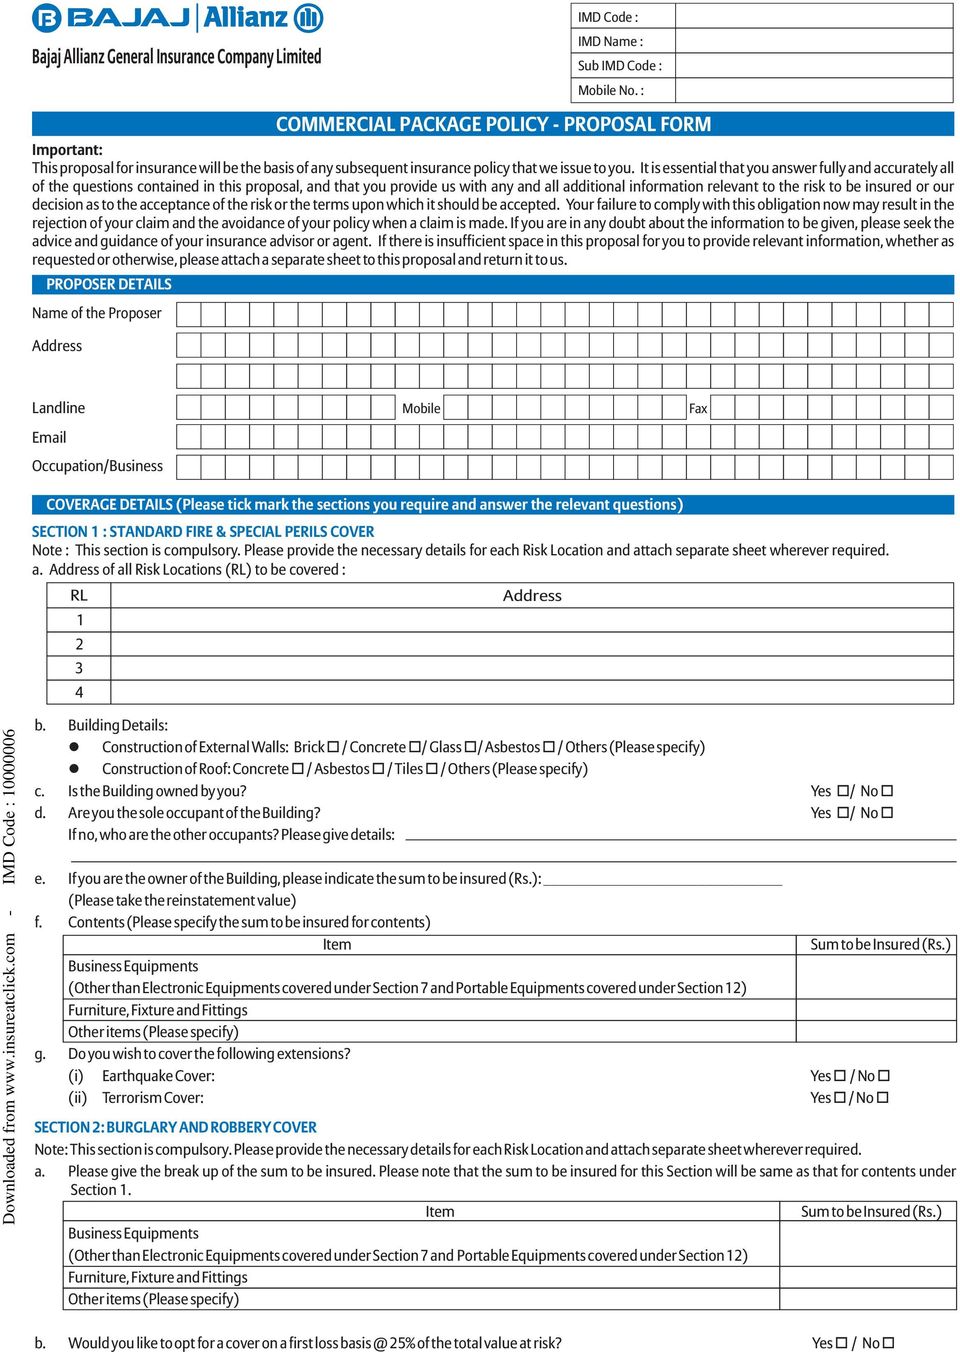 Commercial Package Policy Proposal Form Pdf Free Download